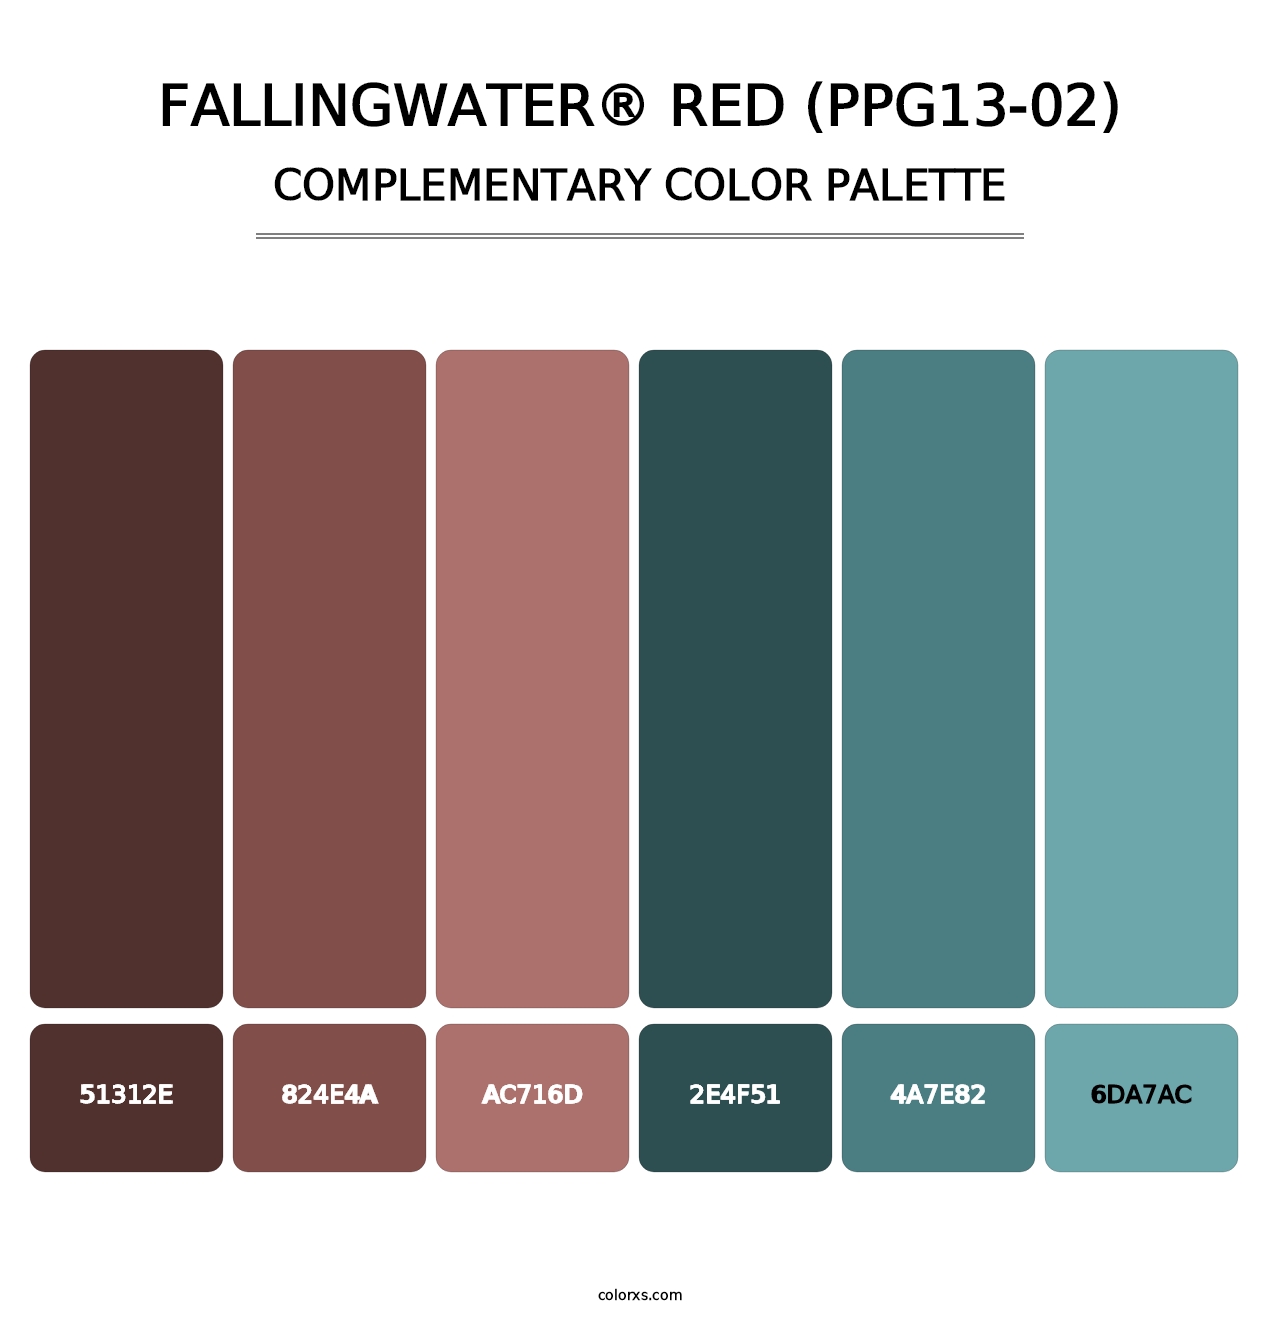 Fallingwater® Red (PPG13-02) - Complementary Color Palette